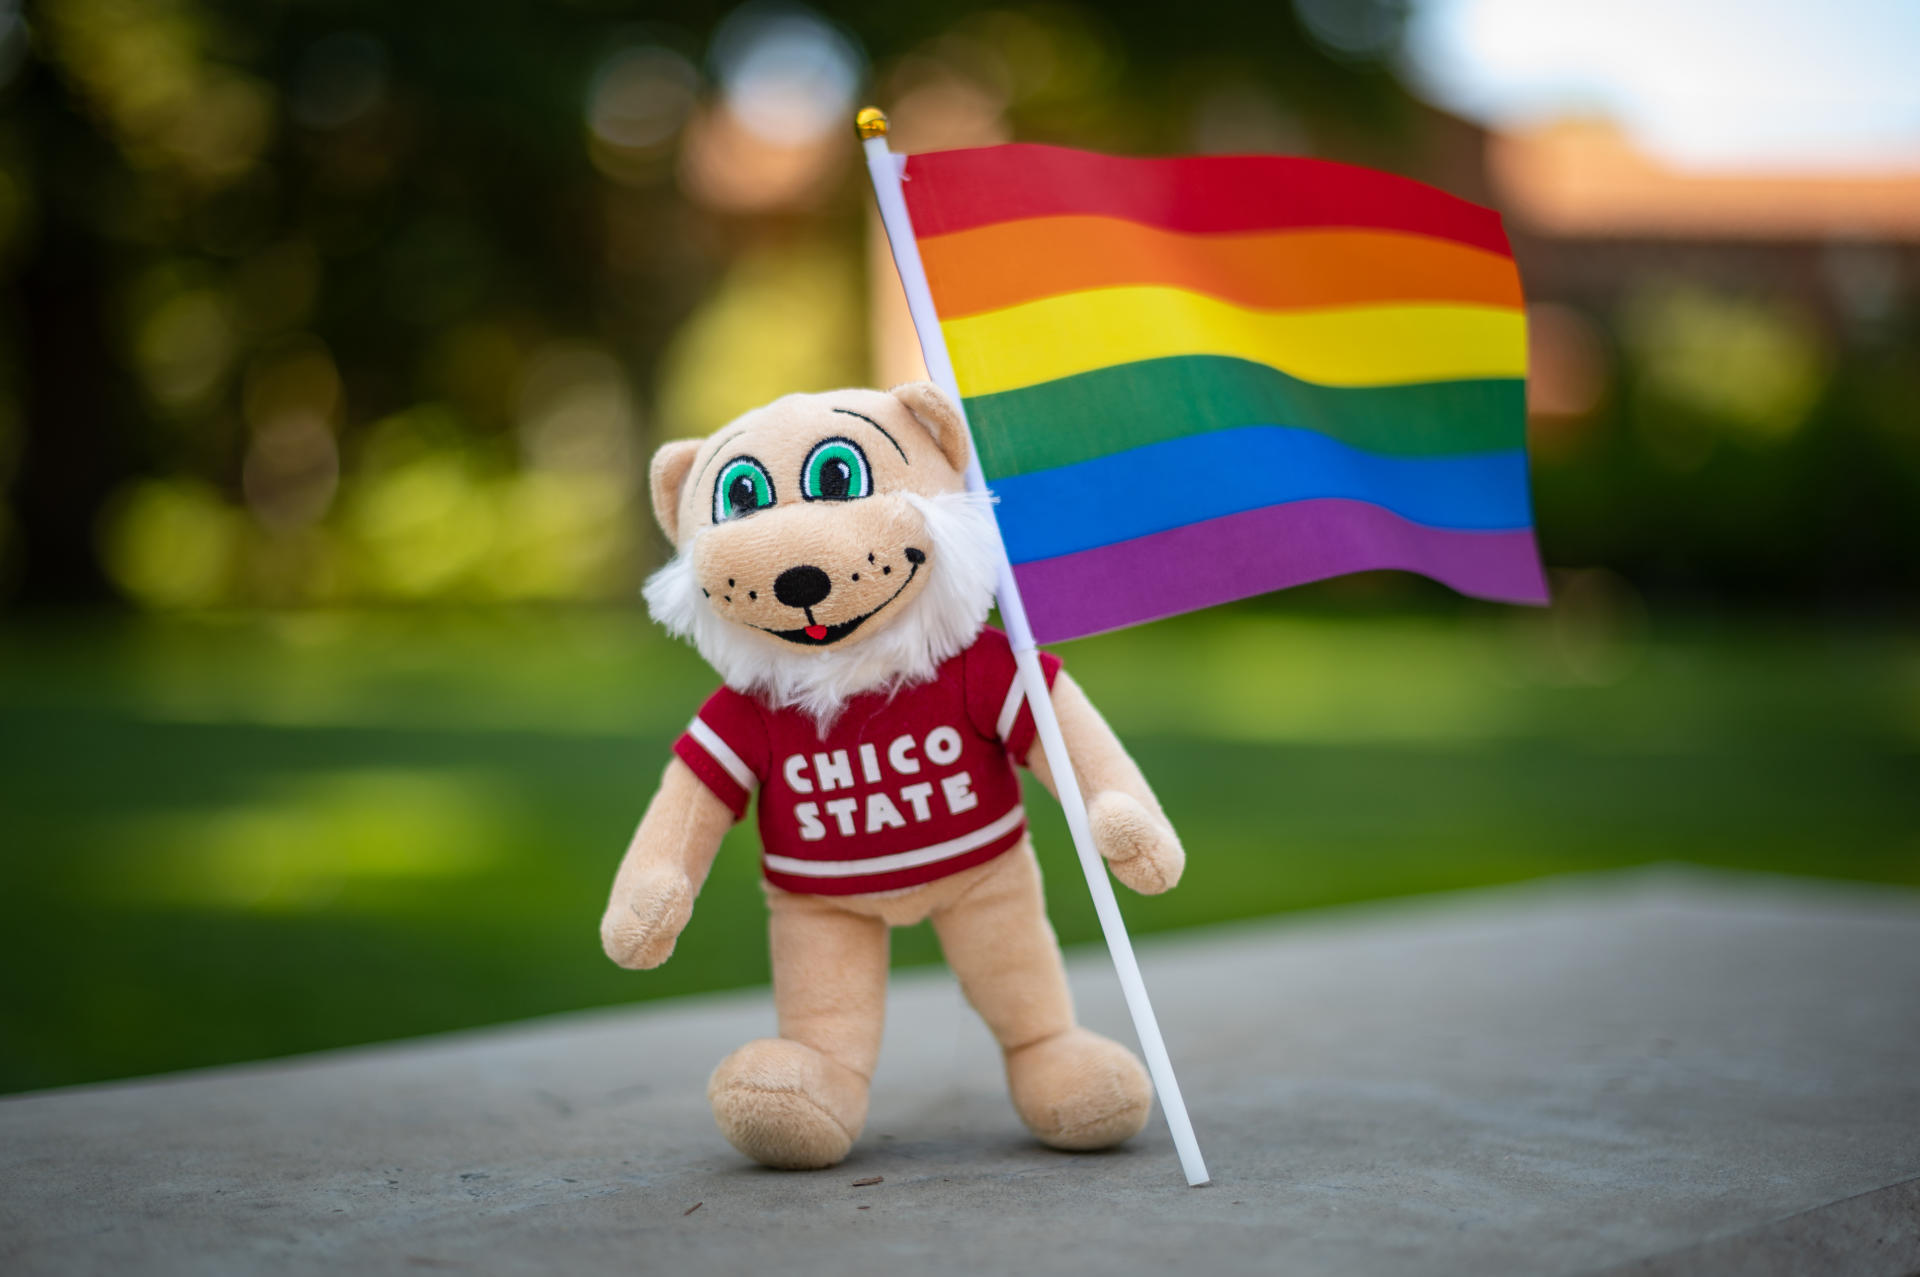 A plush doll of a wildcat holds a pride flag